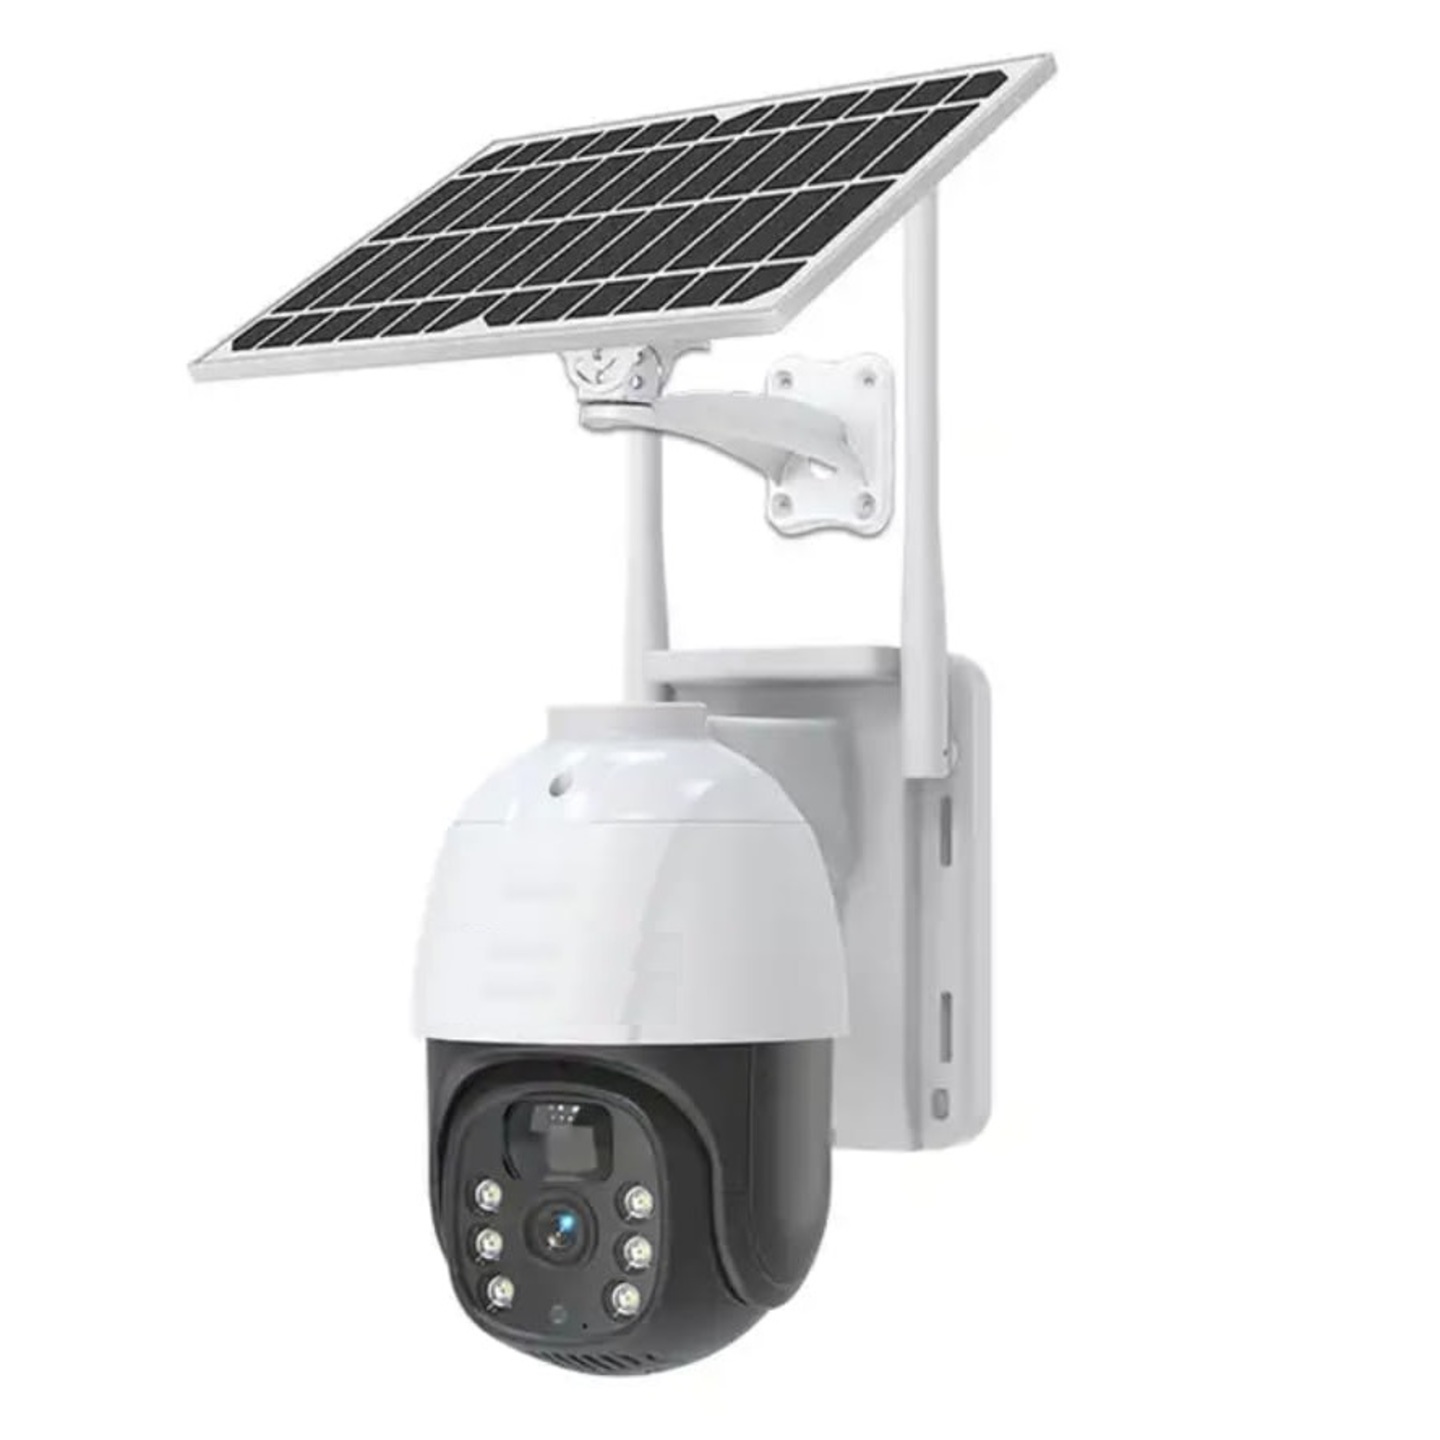 Smart Home Solar Camera with Solar Panel, 2-Way Voice call, Color Night Vision, AI Human Detection, IP66 Waterproof, PTZ